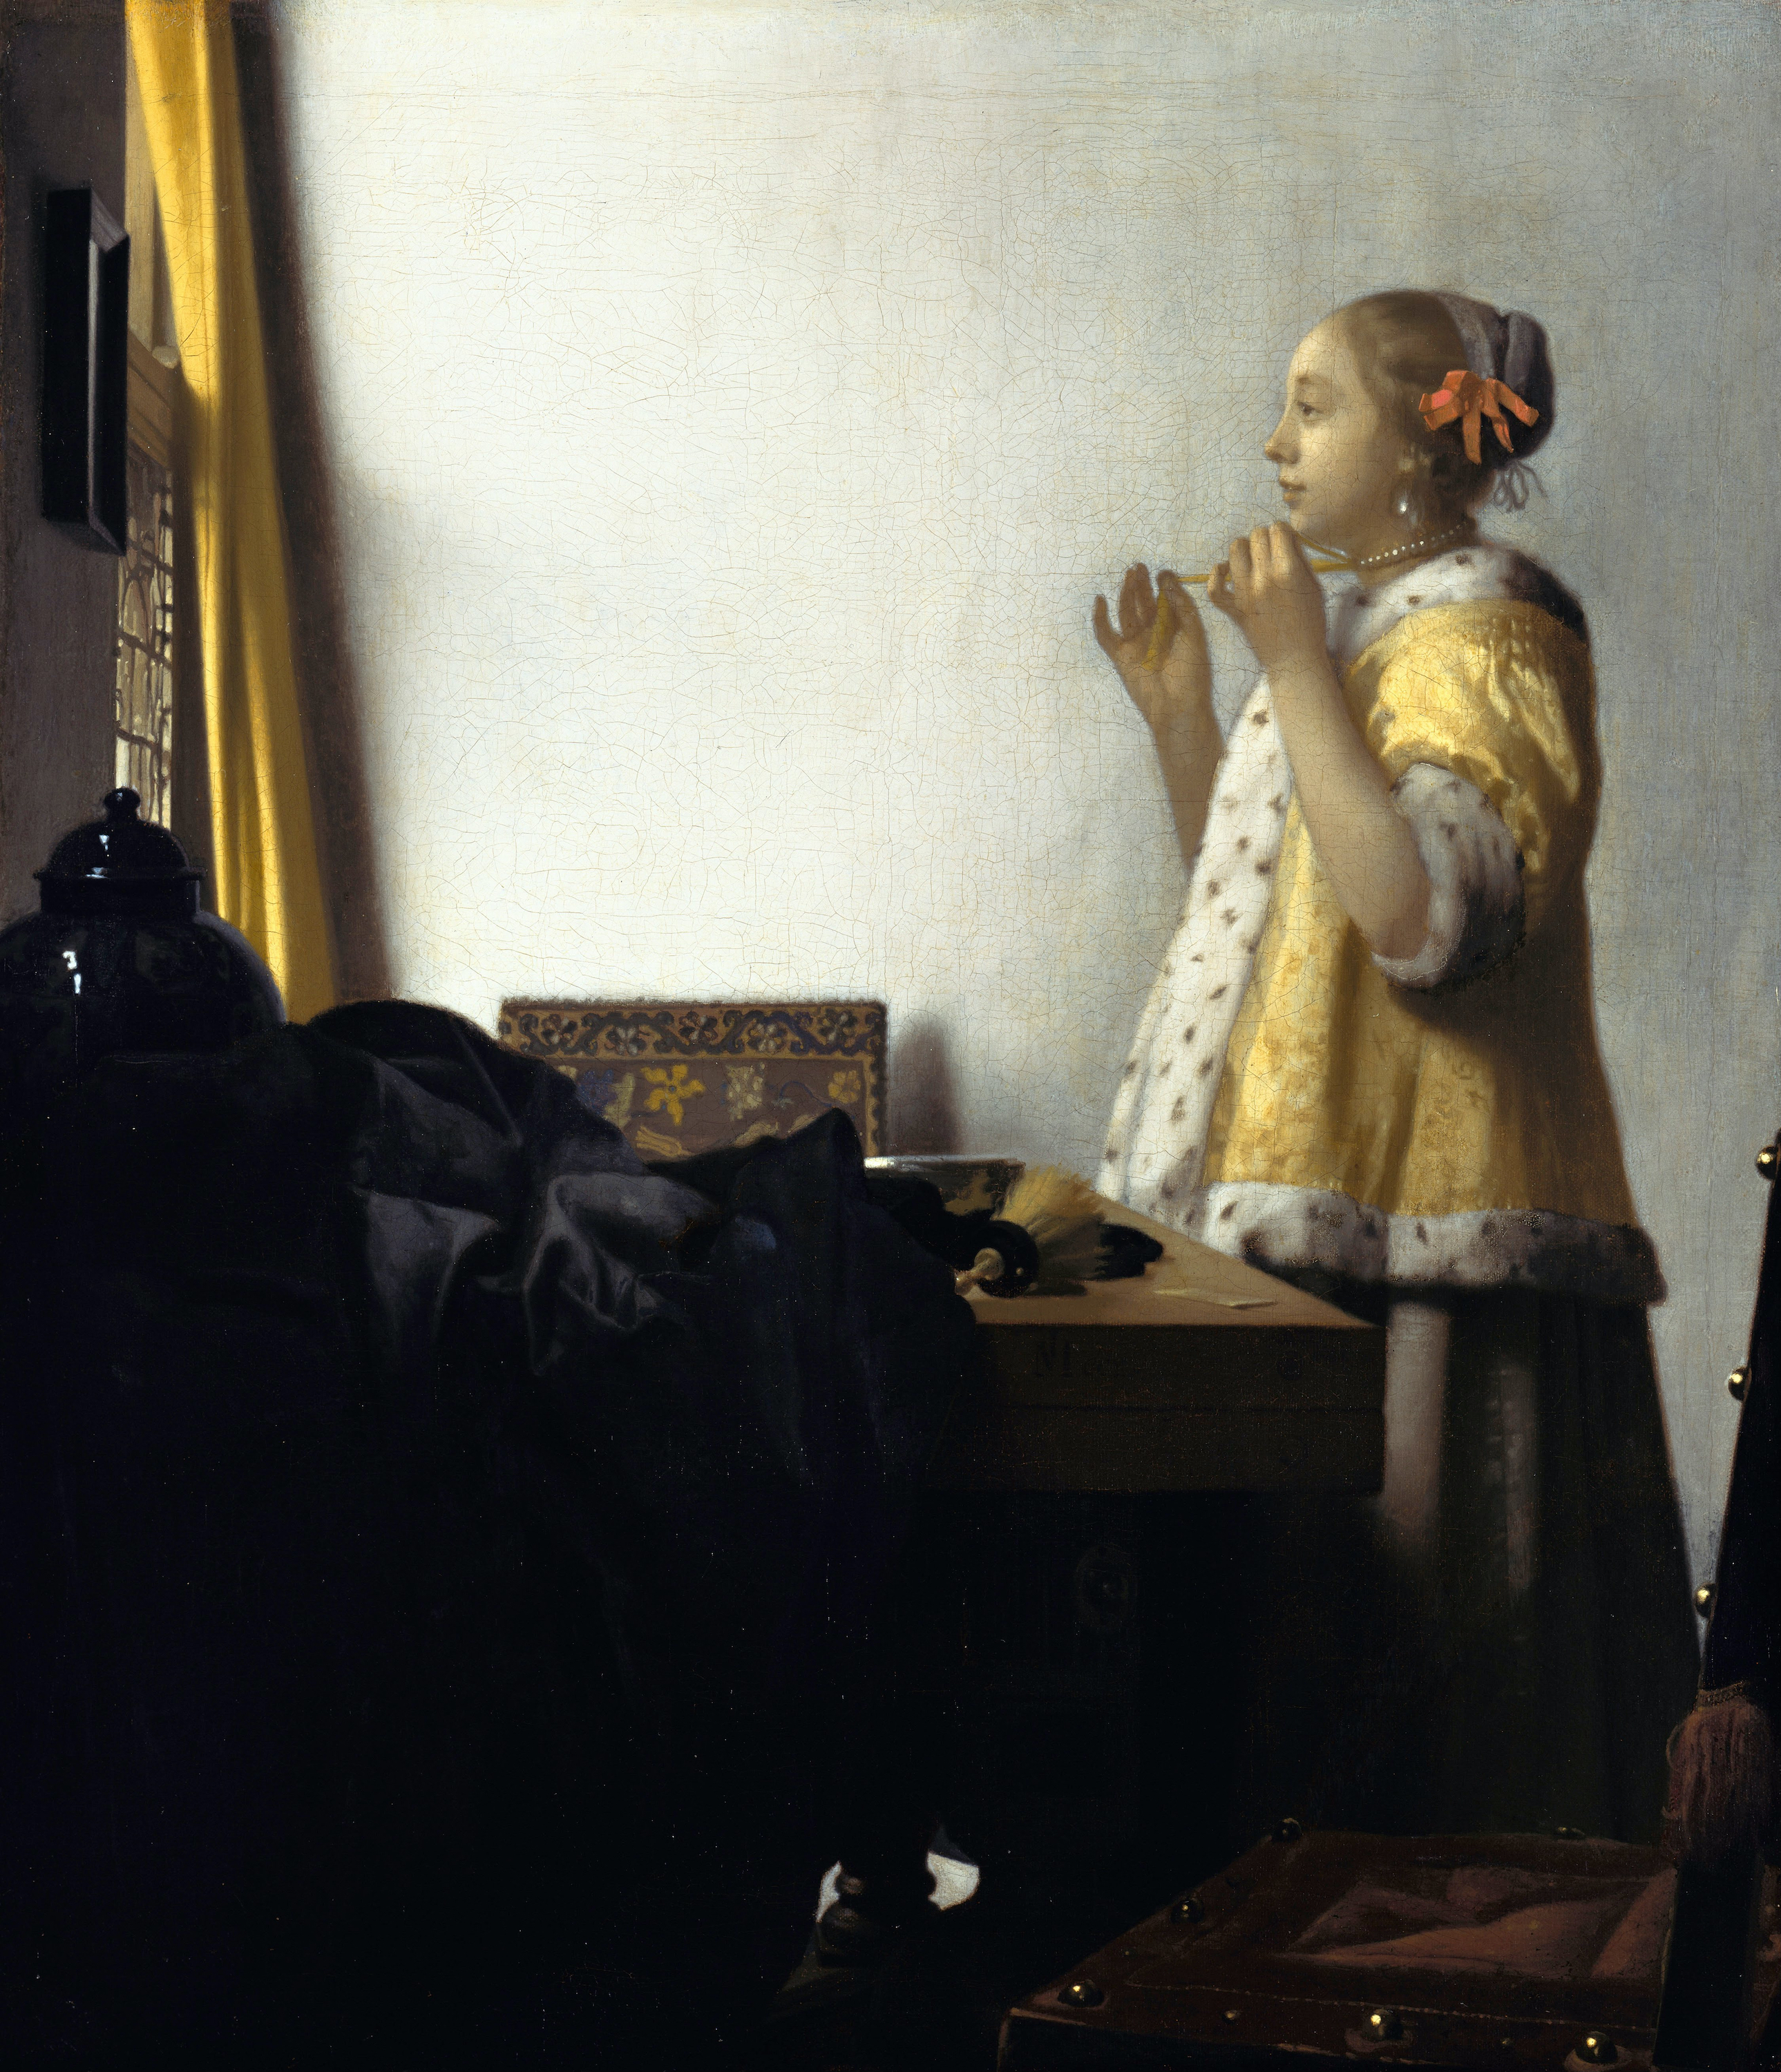 Young Woman with a Pearl Necklace by Johannes Vermeer - around 1662 - 56.1 x 47.1cm Gemäldegalerie